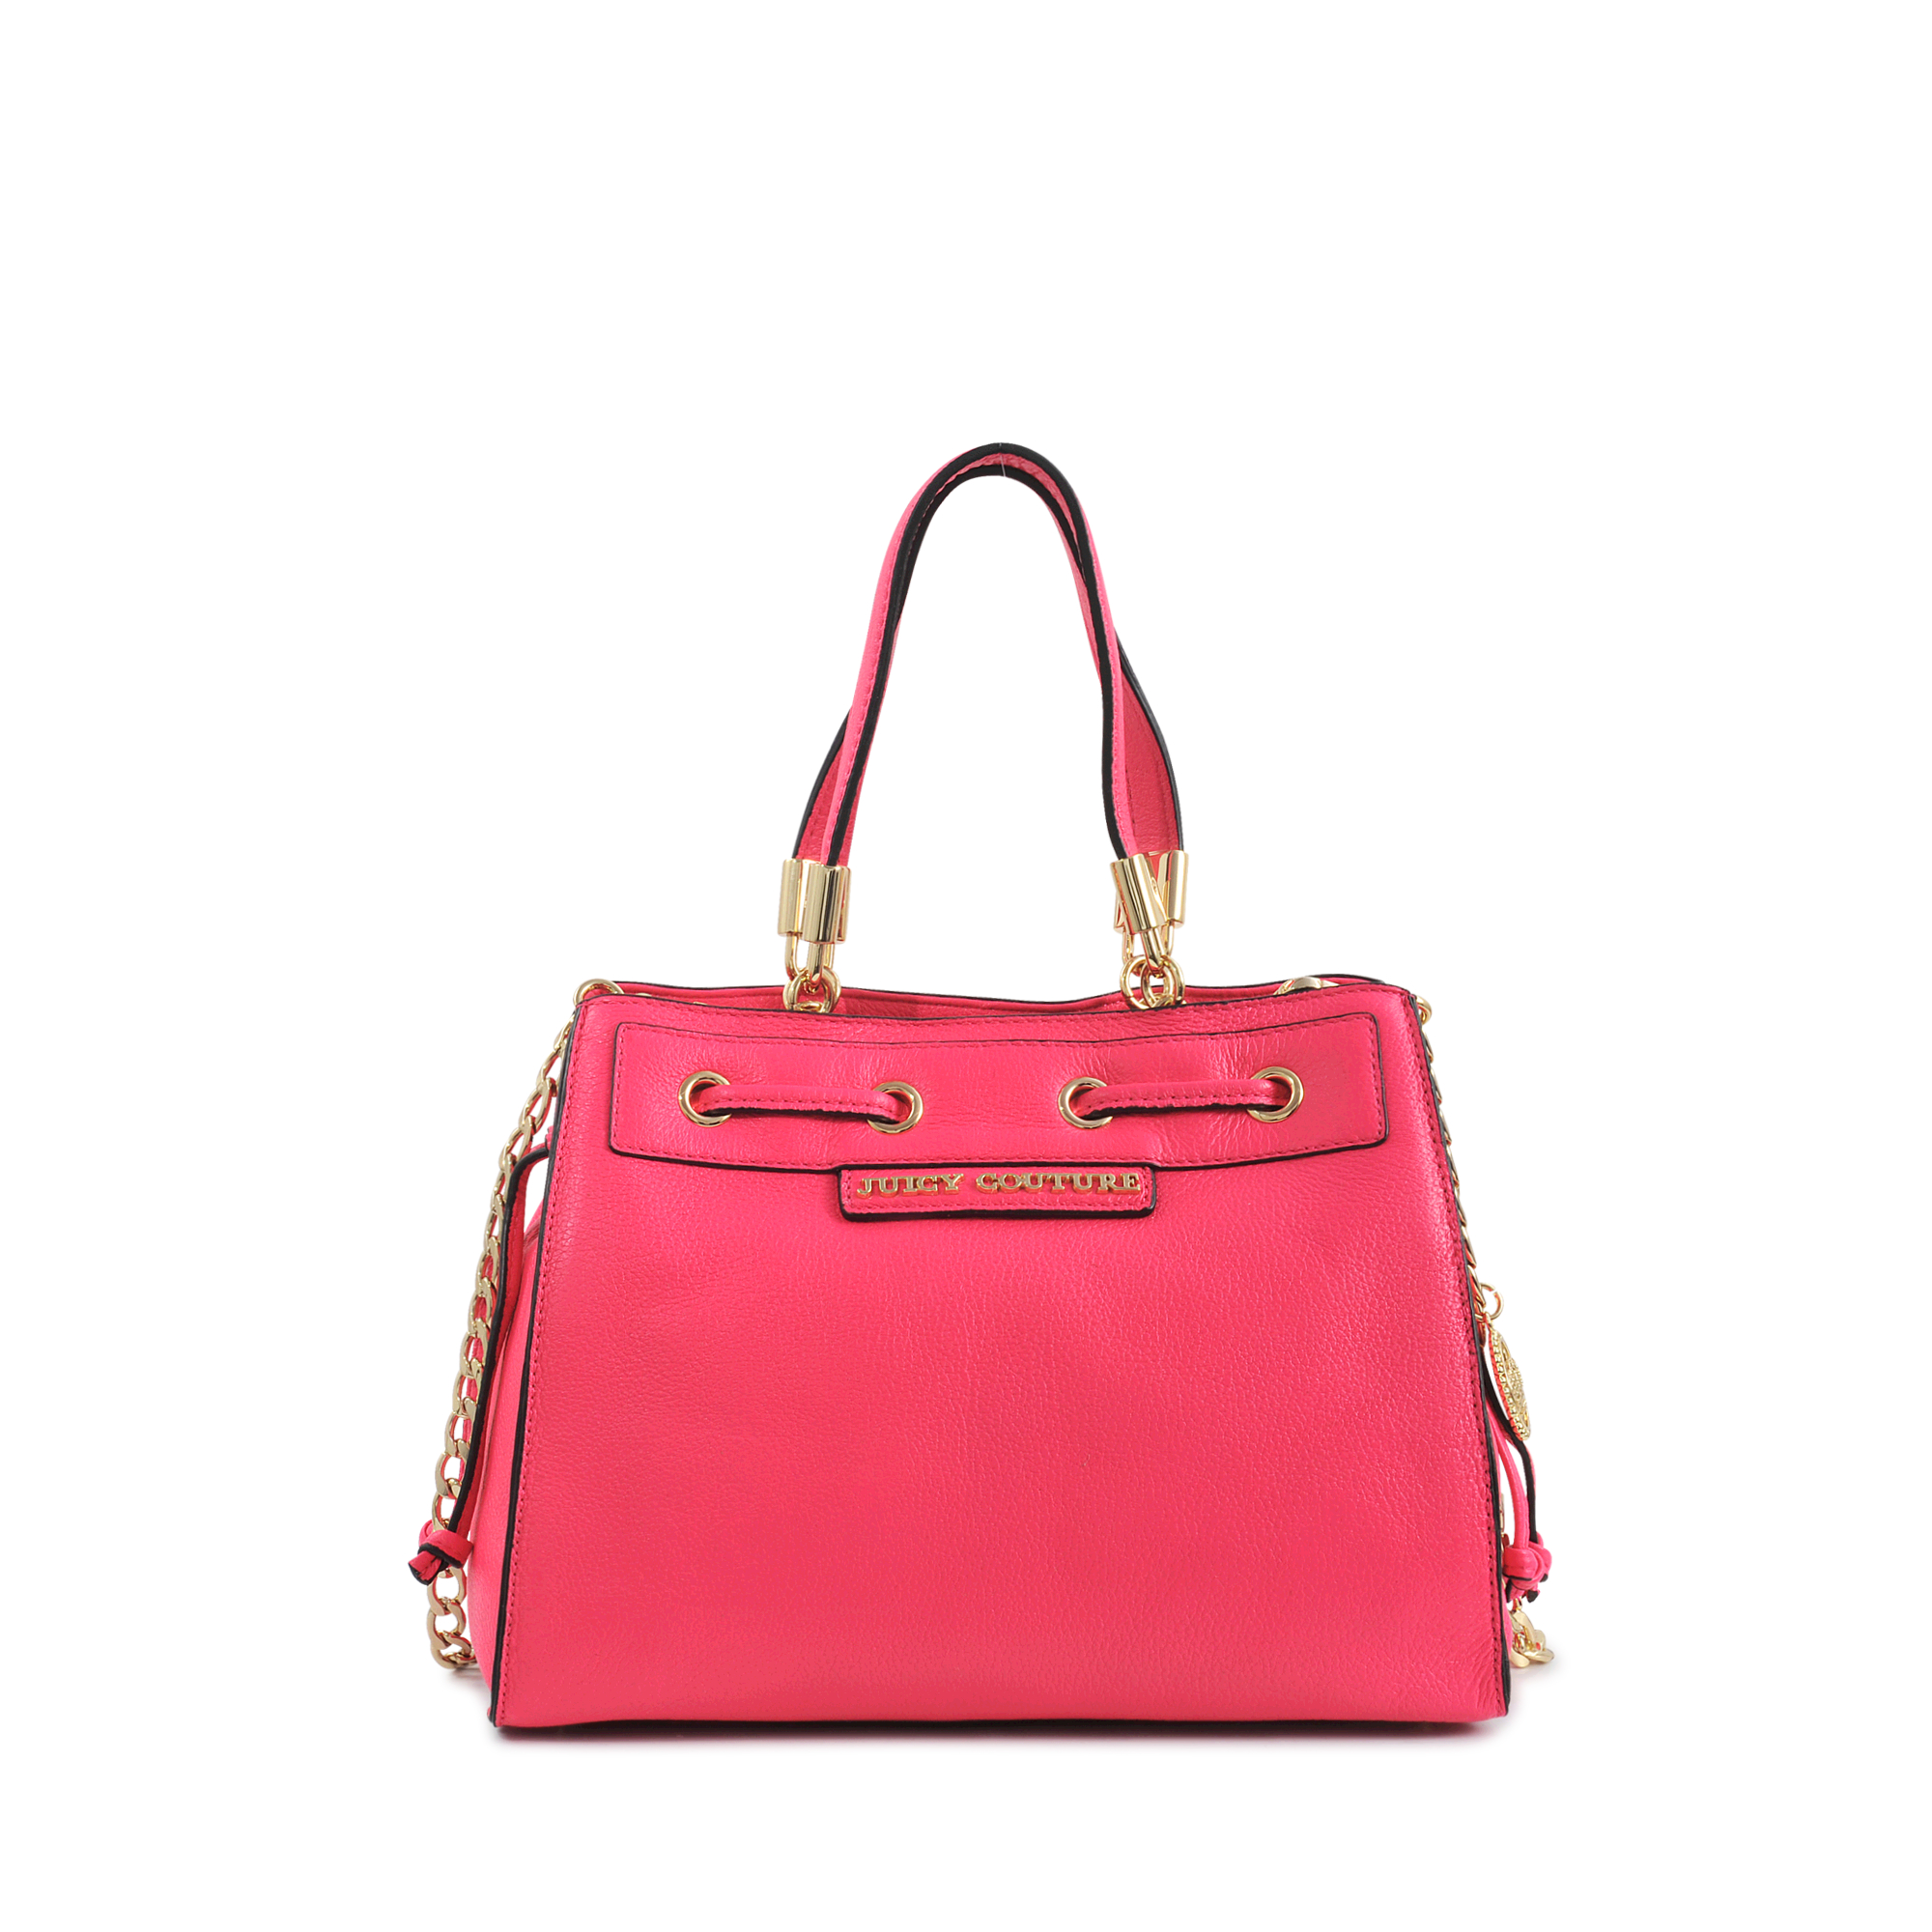 Lyst - Juicy Couture Mini Daydreamer Robertson Bag in Pink